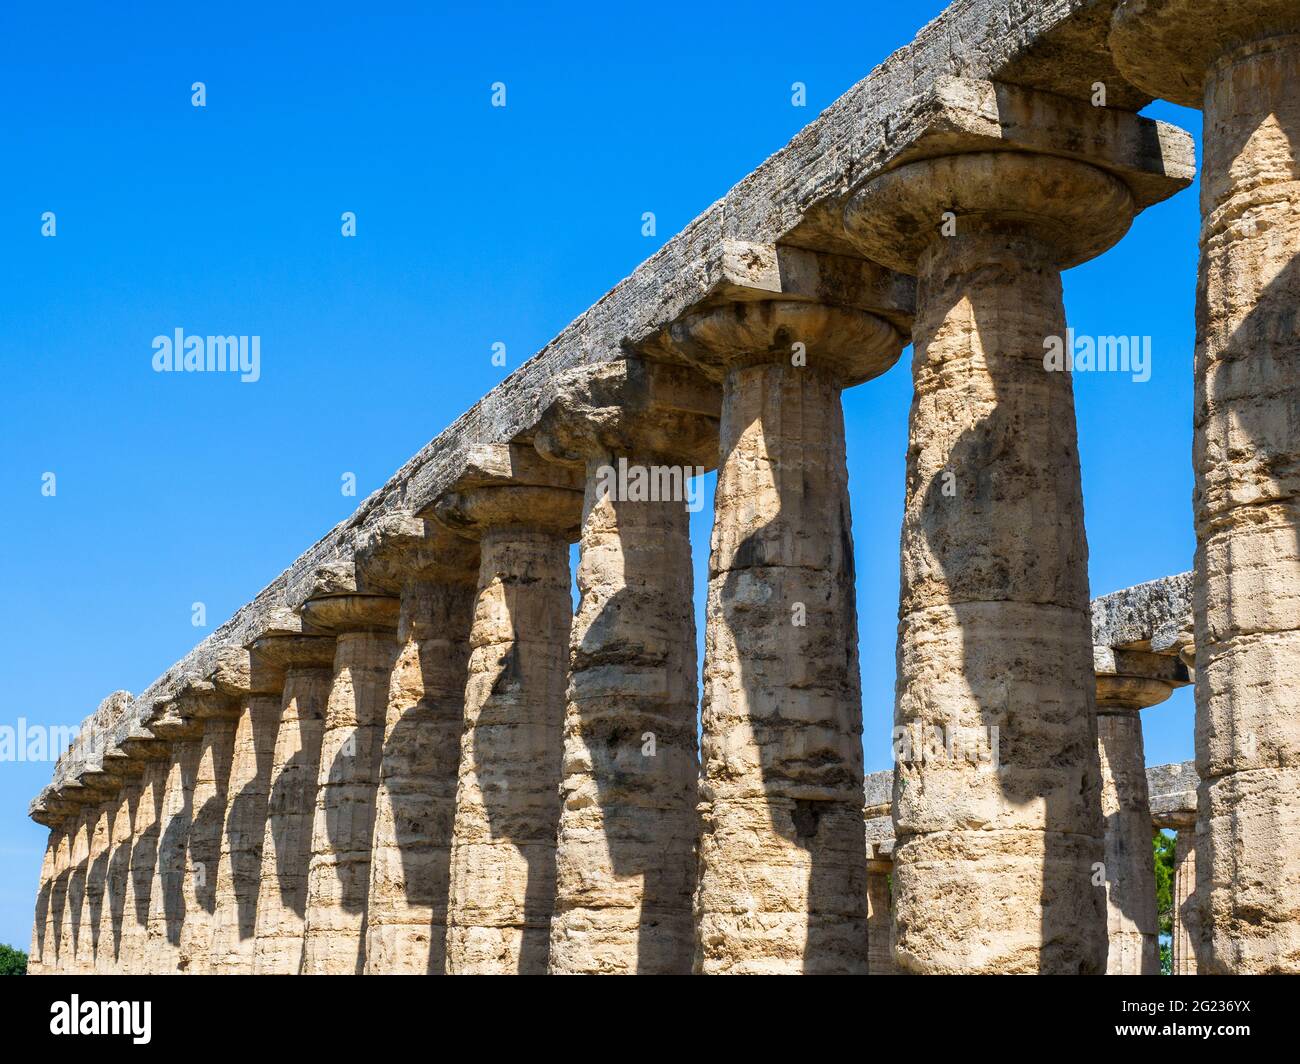 The Greek doric style temple of Hera (archaic temple) - Archaeological Area of Paestum - Salerno, Italy Stock Photo